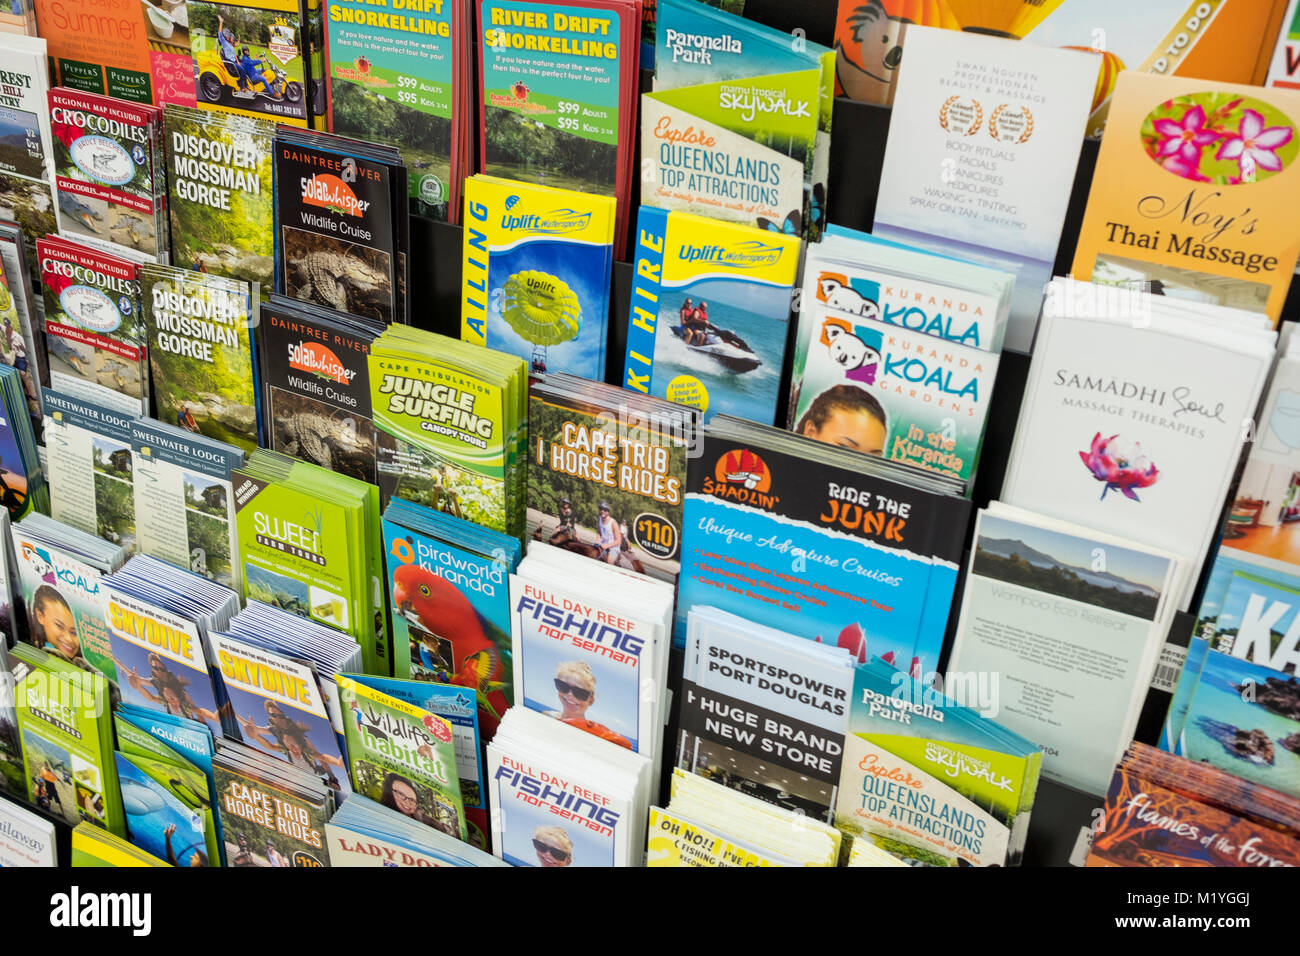 Tourism brochures and flyers promoting holiday activities around Port Douglas and Mossman gorge,Far north queensland,Australia Stock Photo